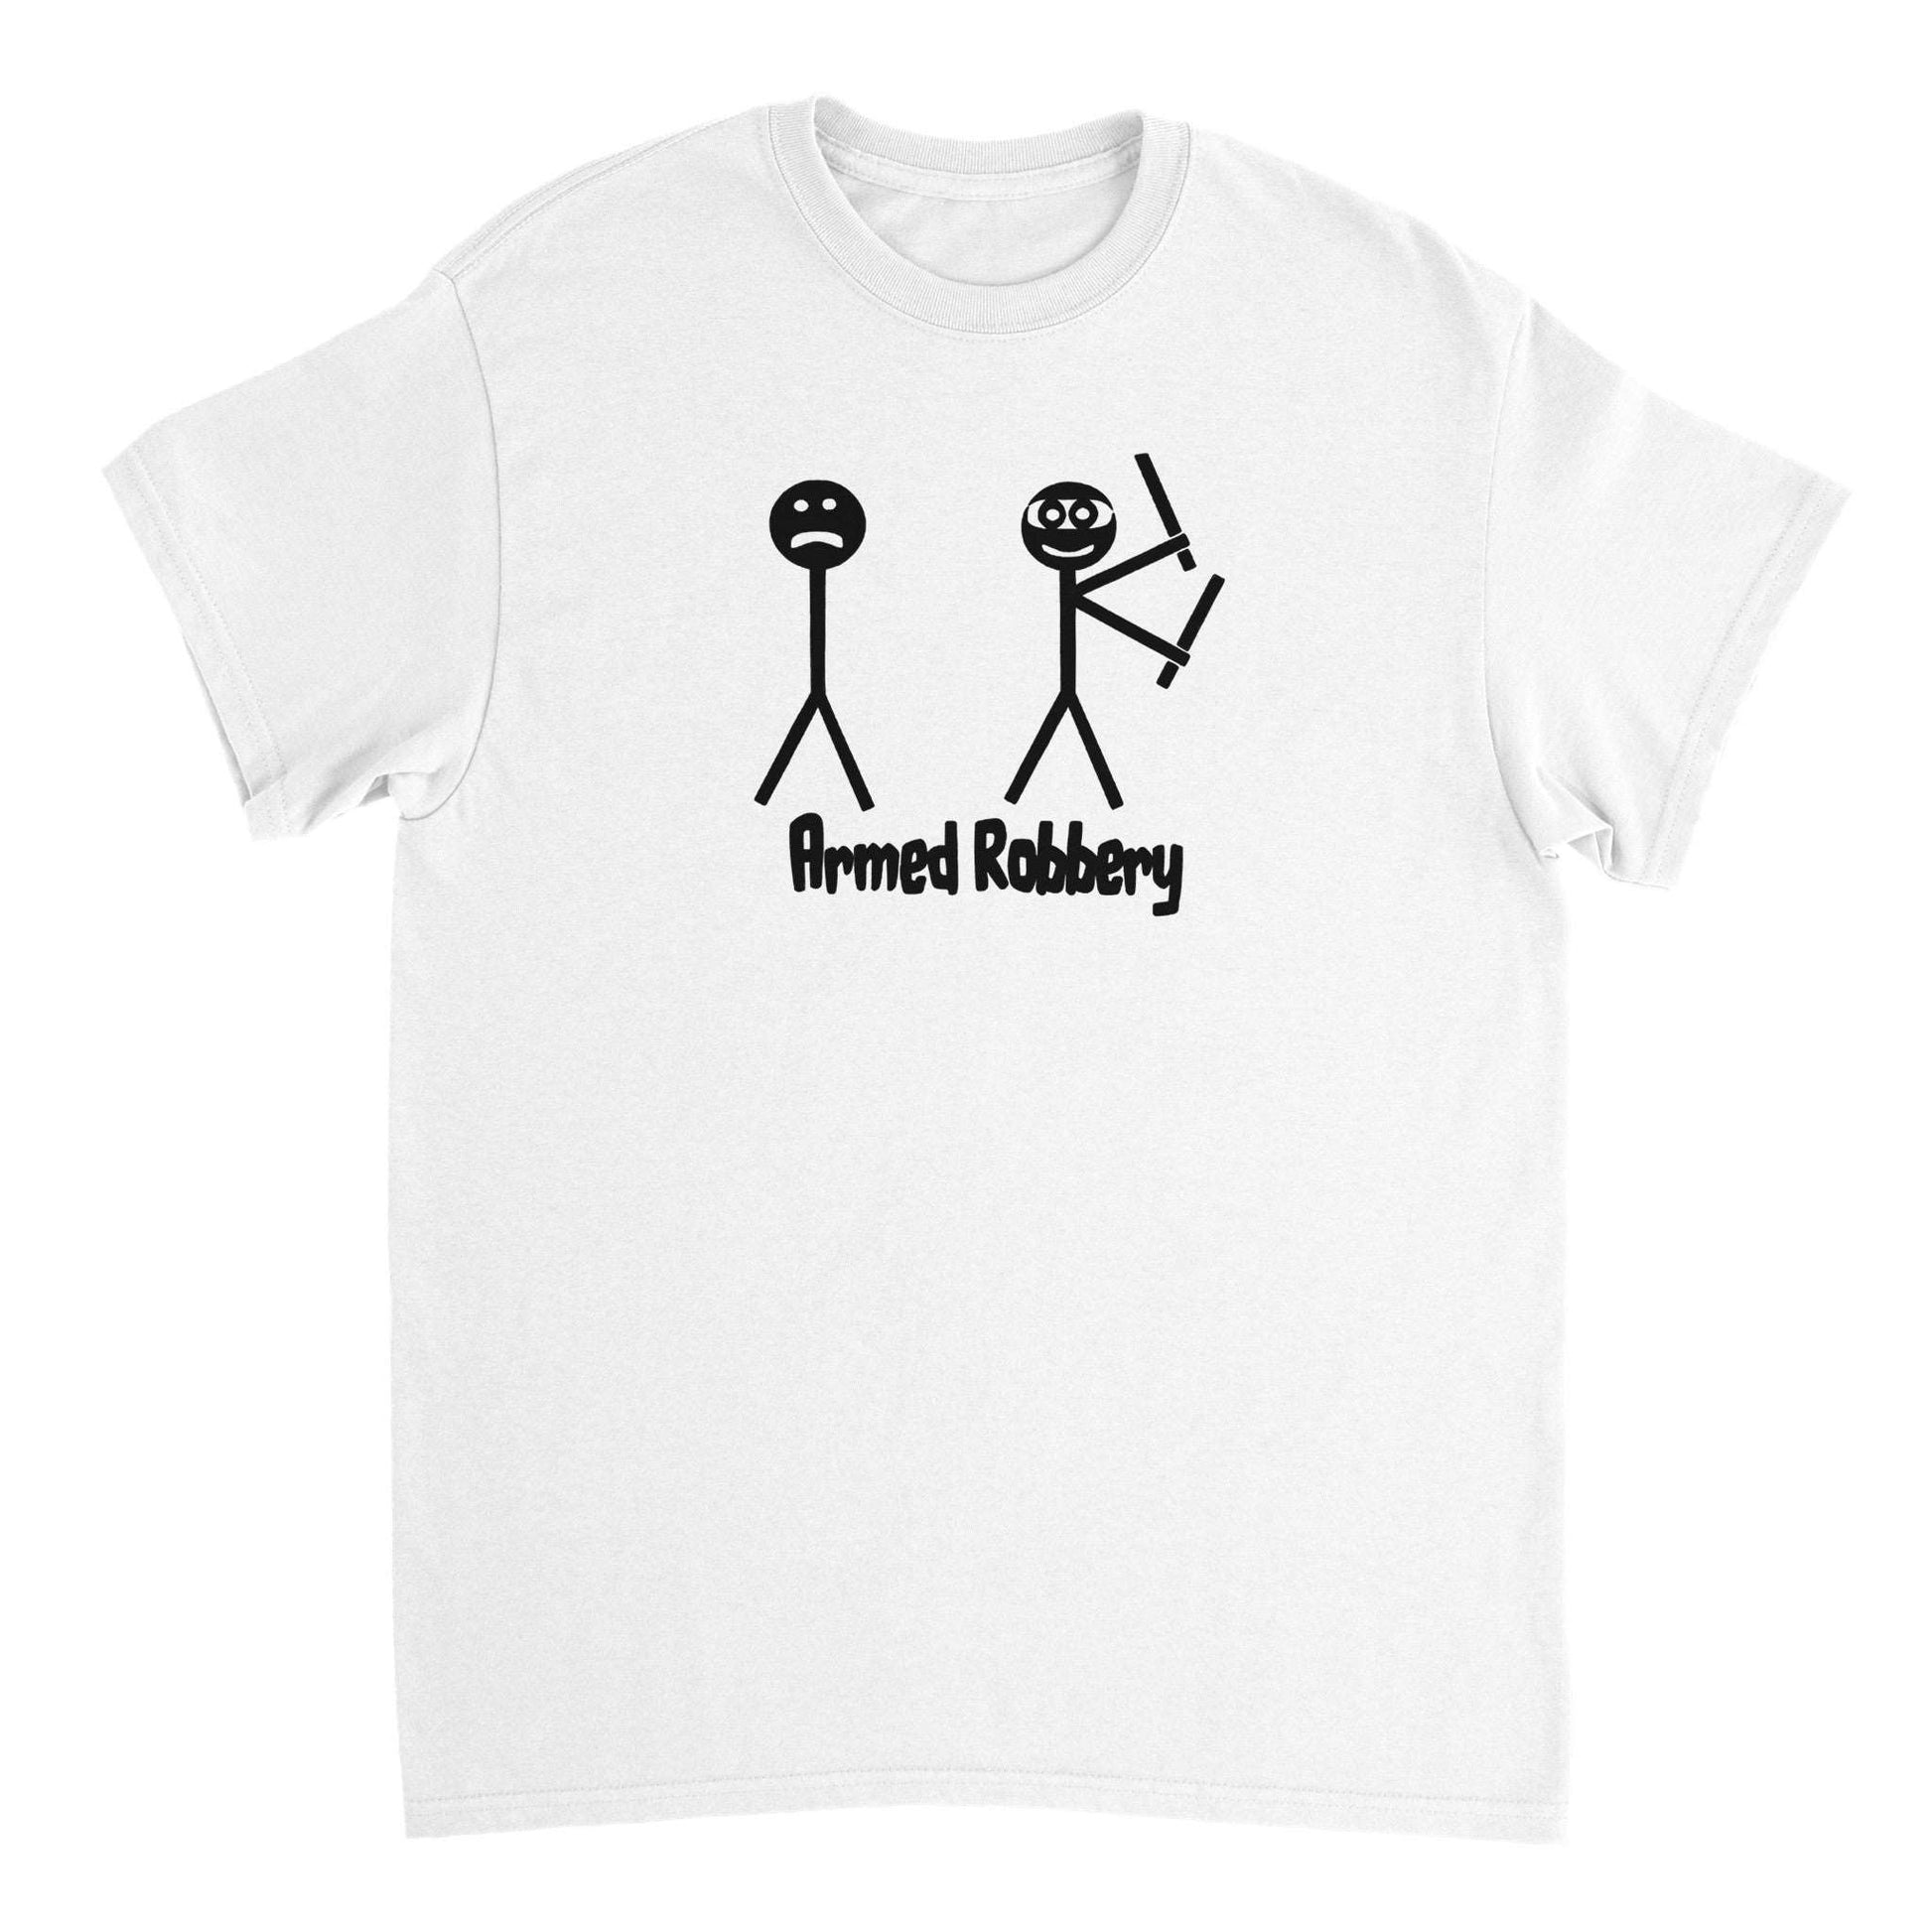 Armed Robbery T-shirt - Mister Snarky's